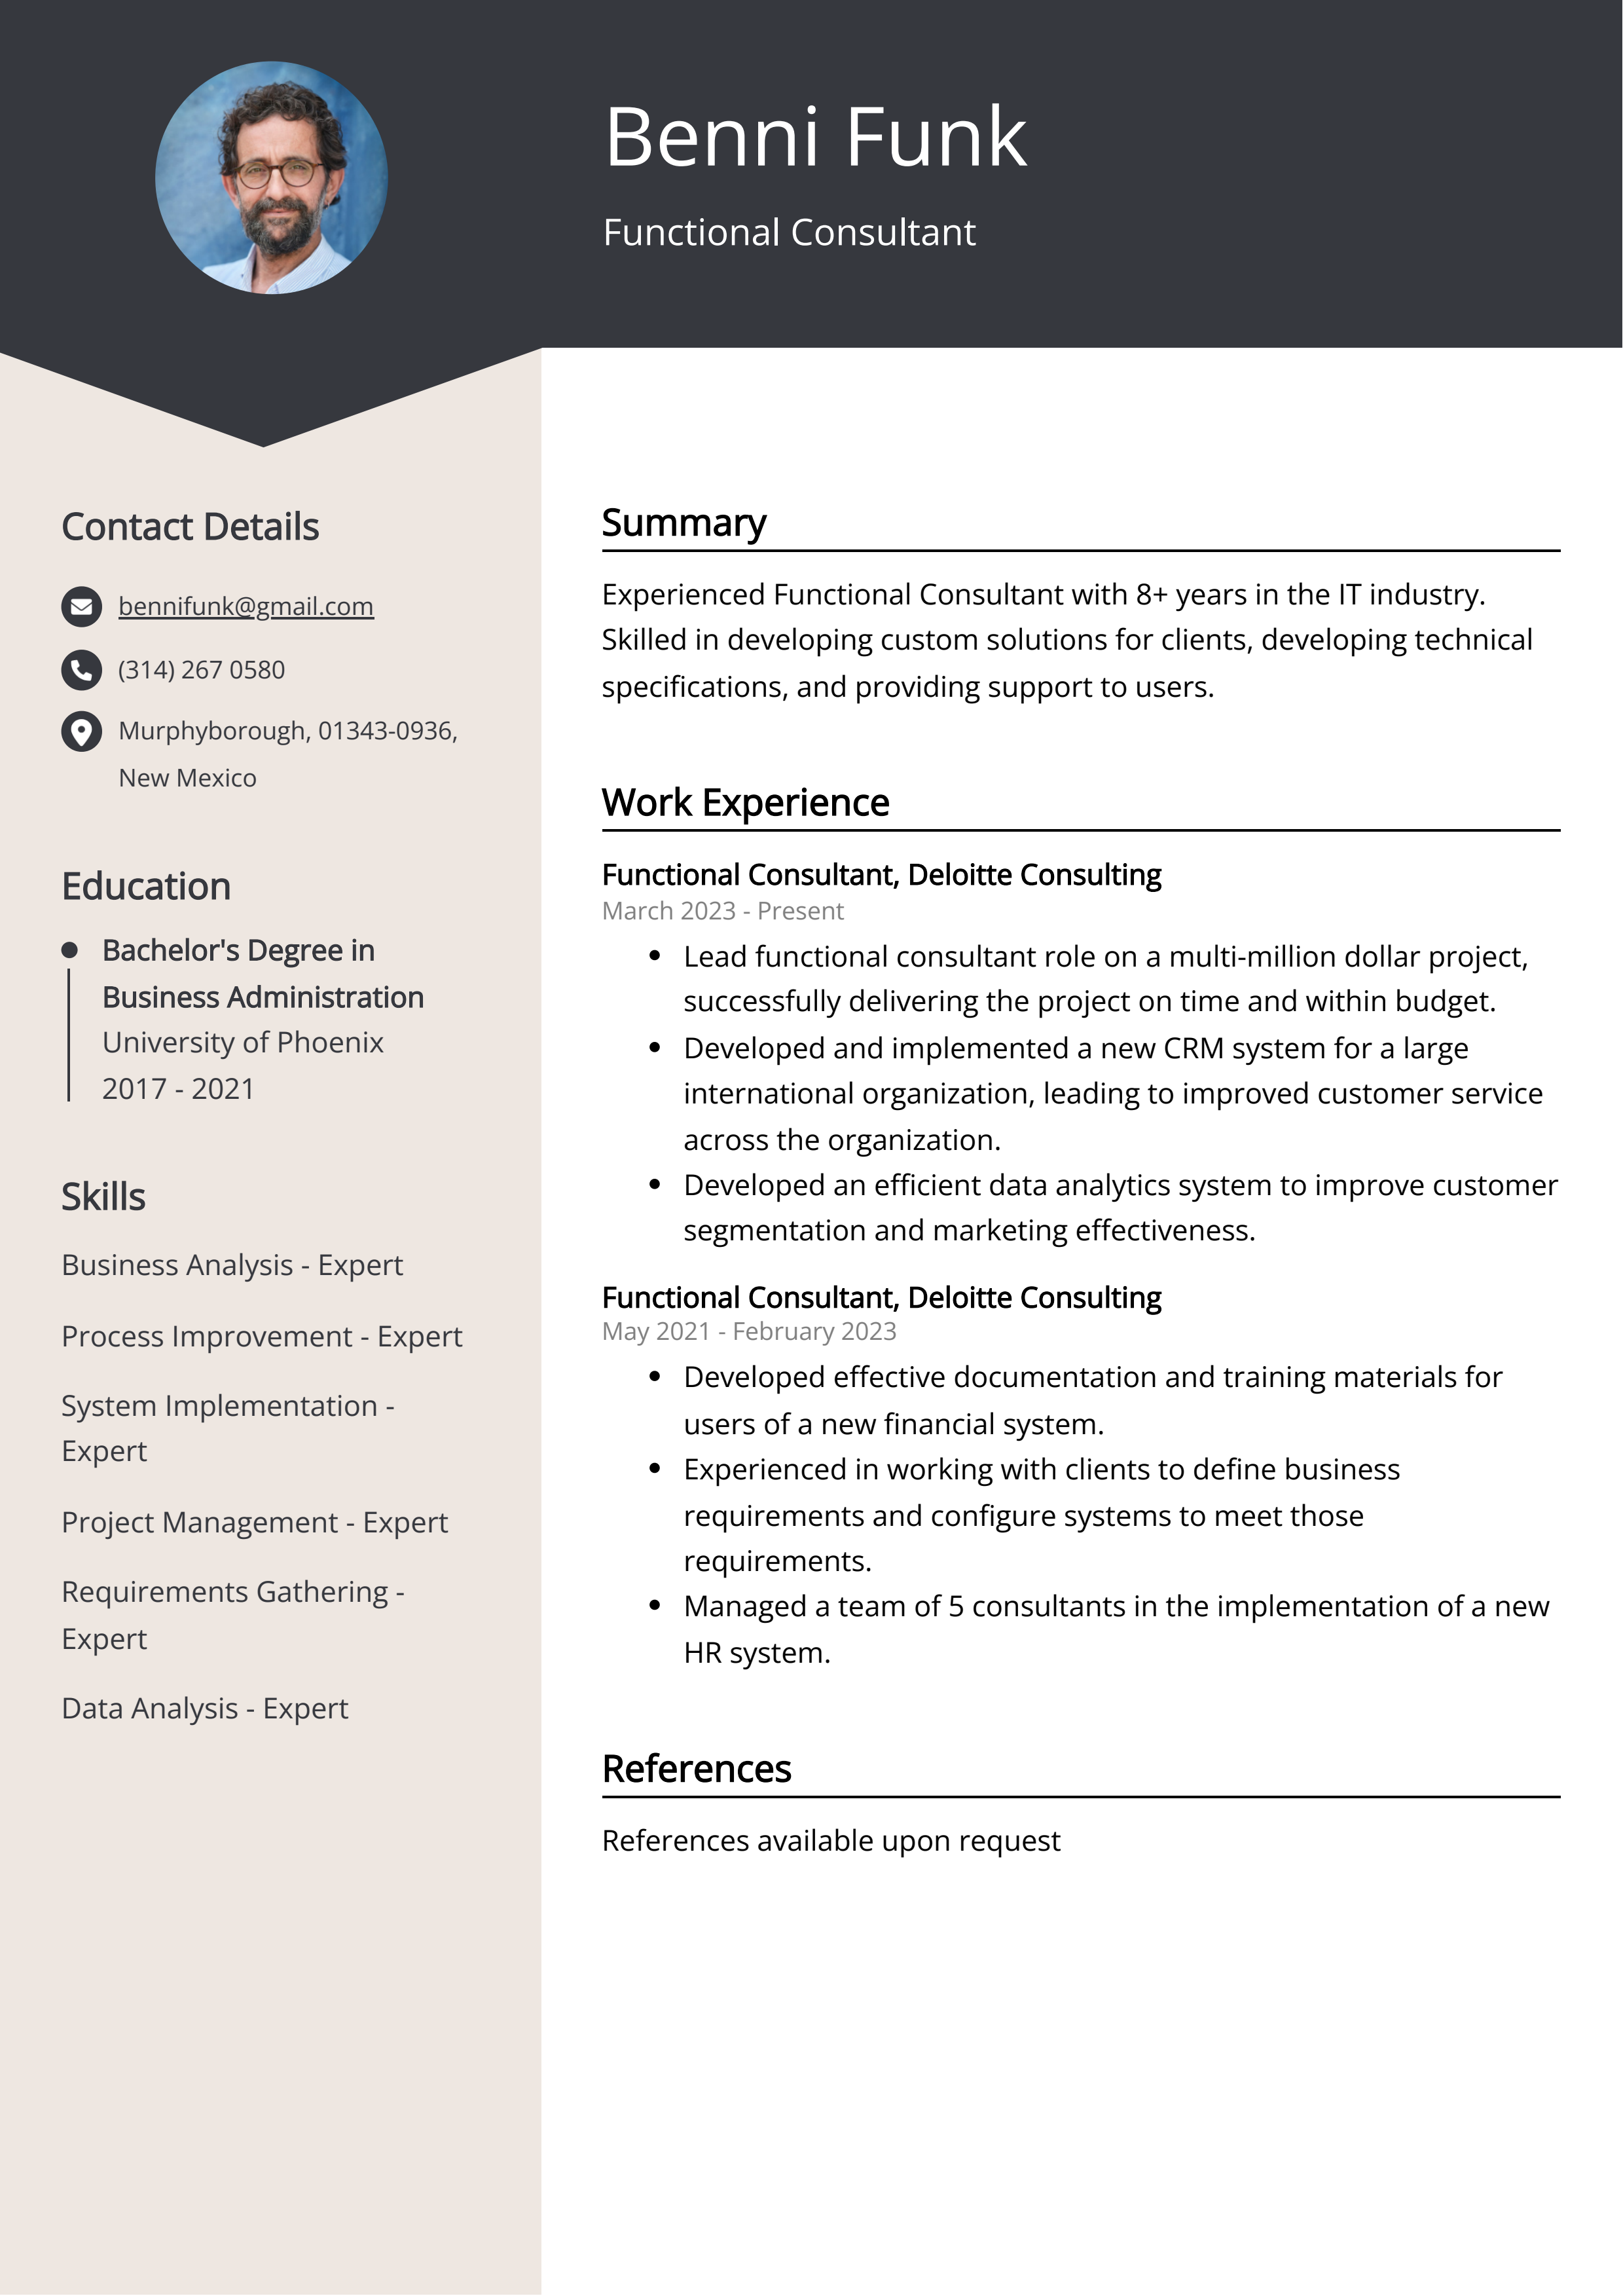 Functional Consultant CV Example